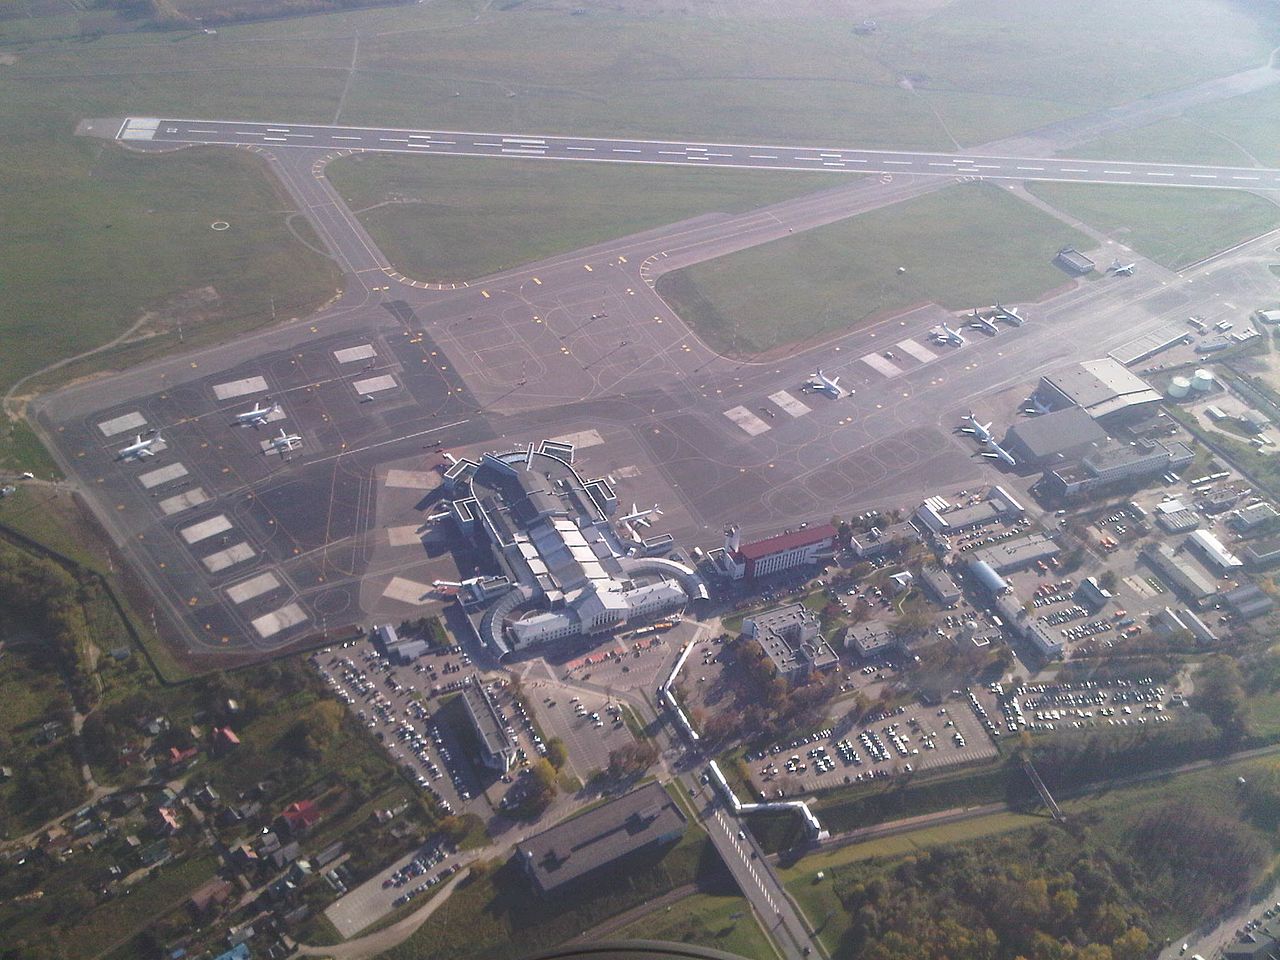 Vilnius Airport in Lithuania